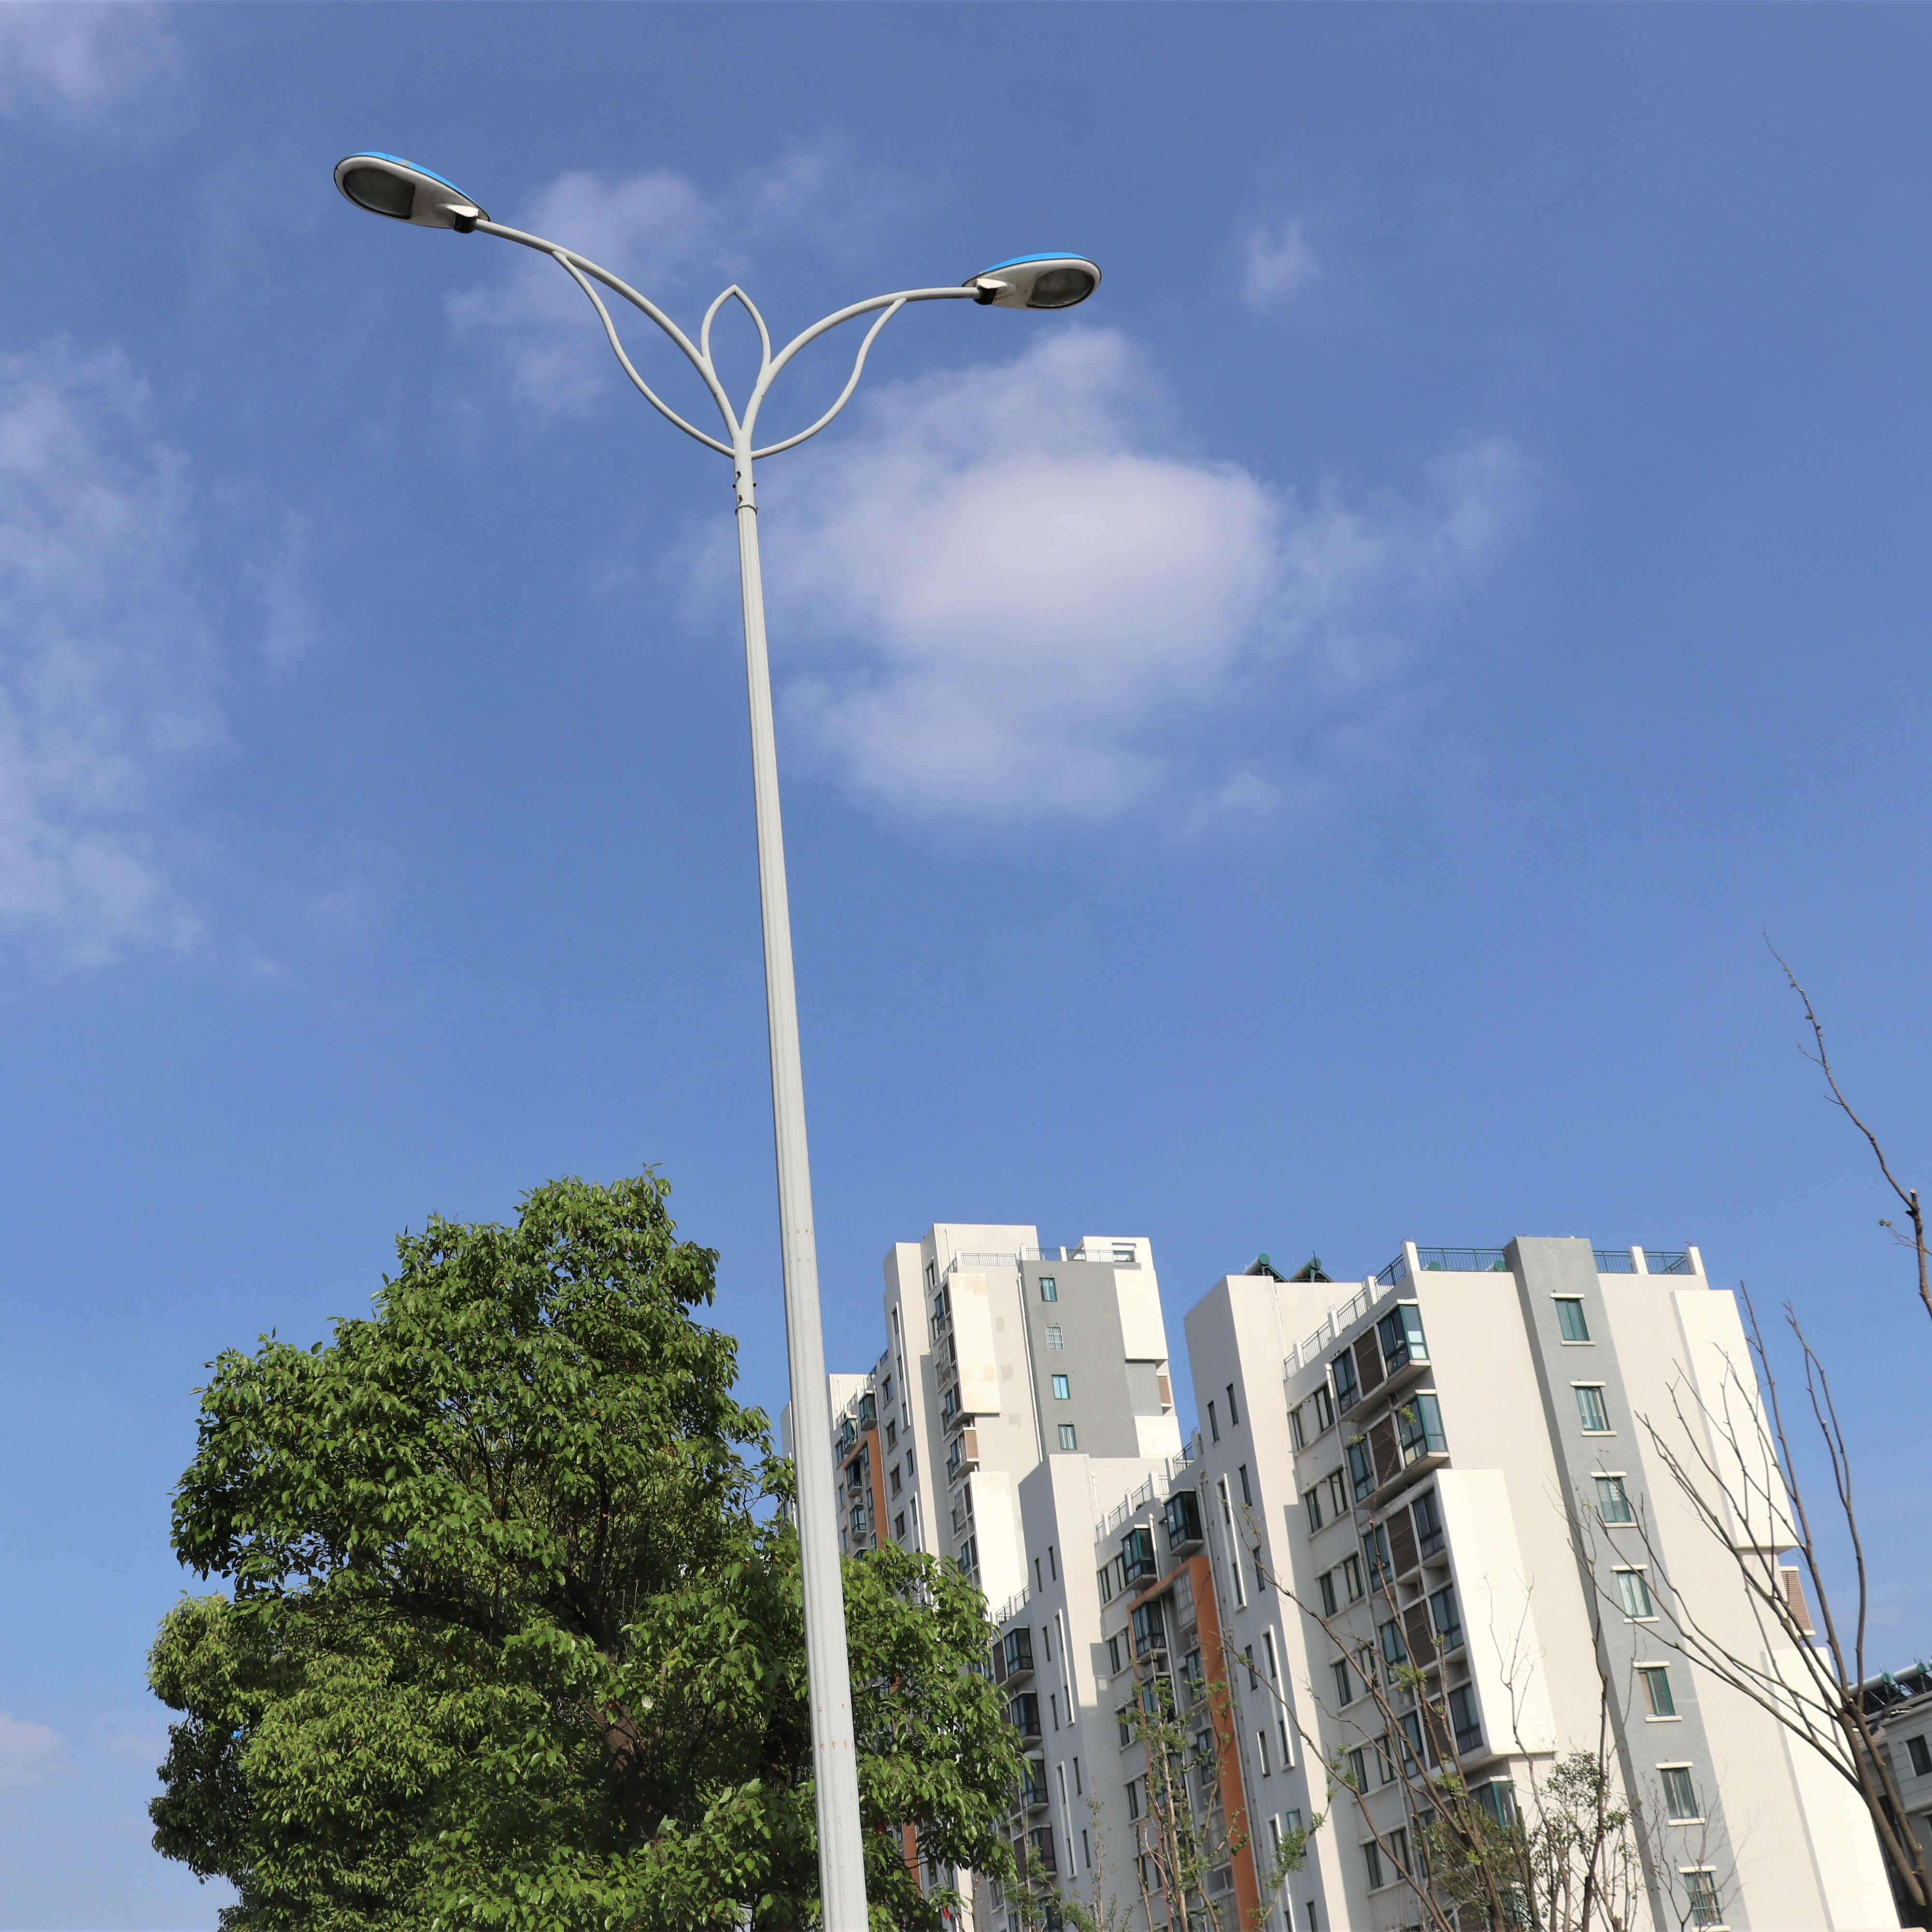 60W Outdoor Led Street Light Featured Image